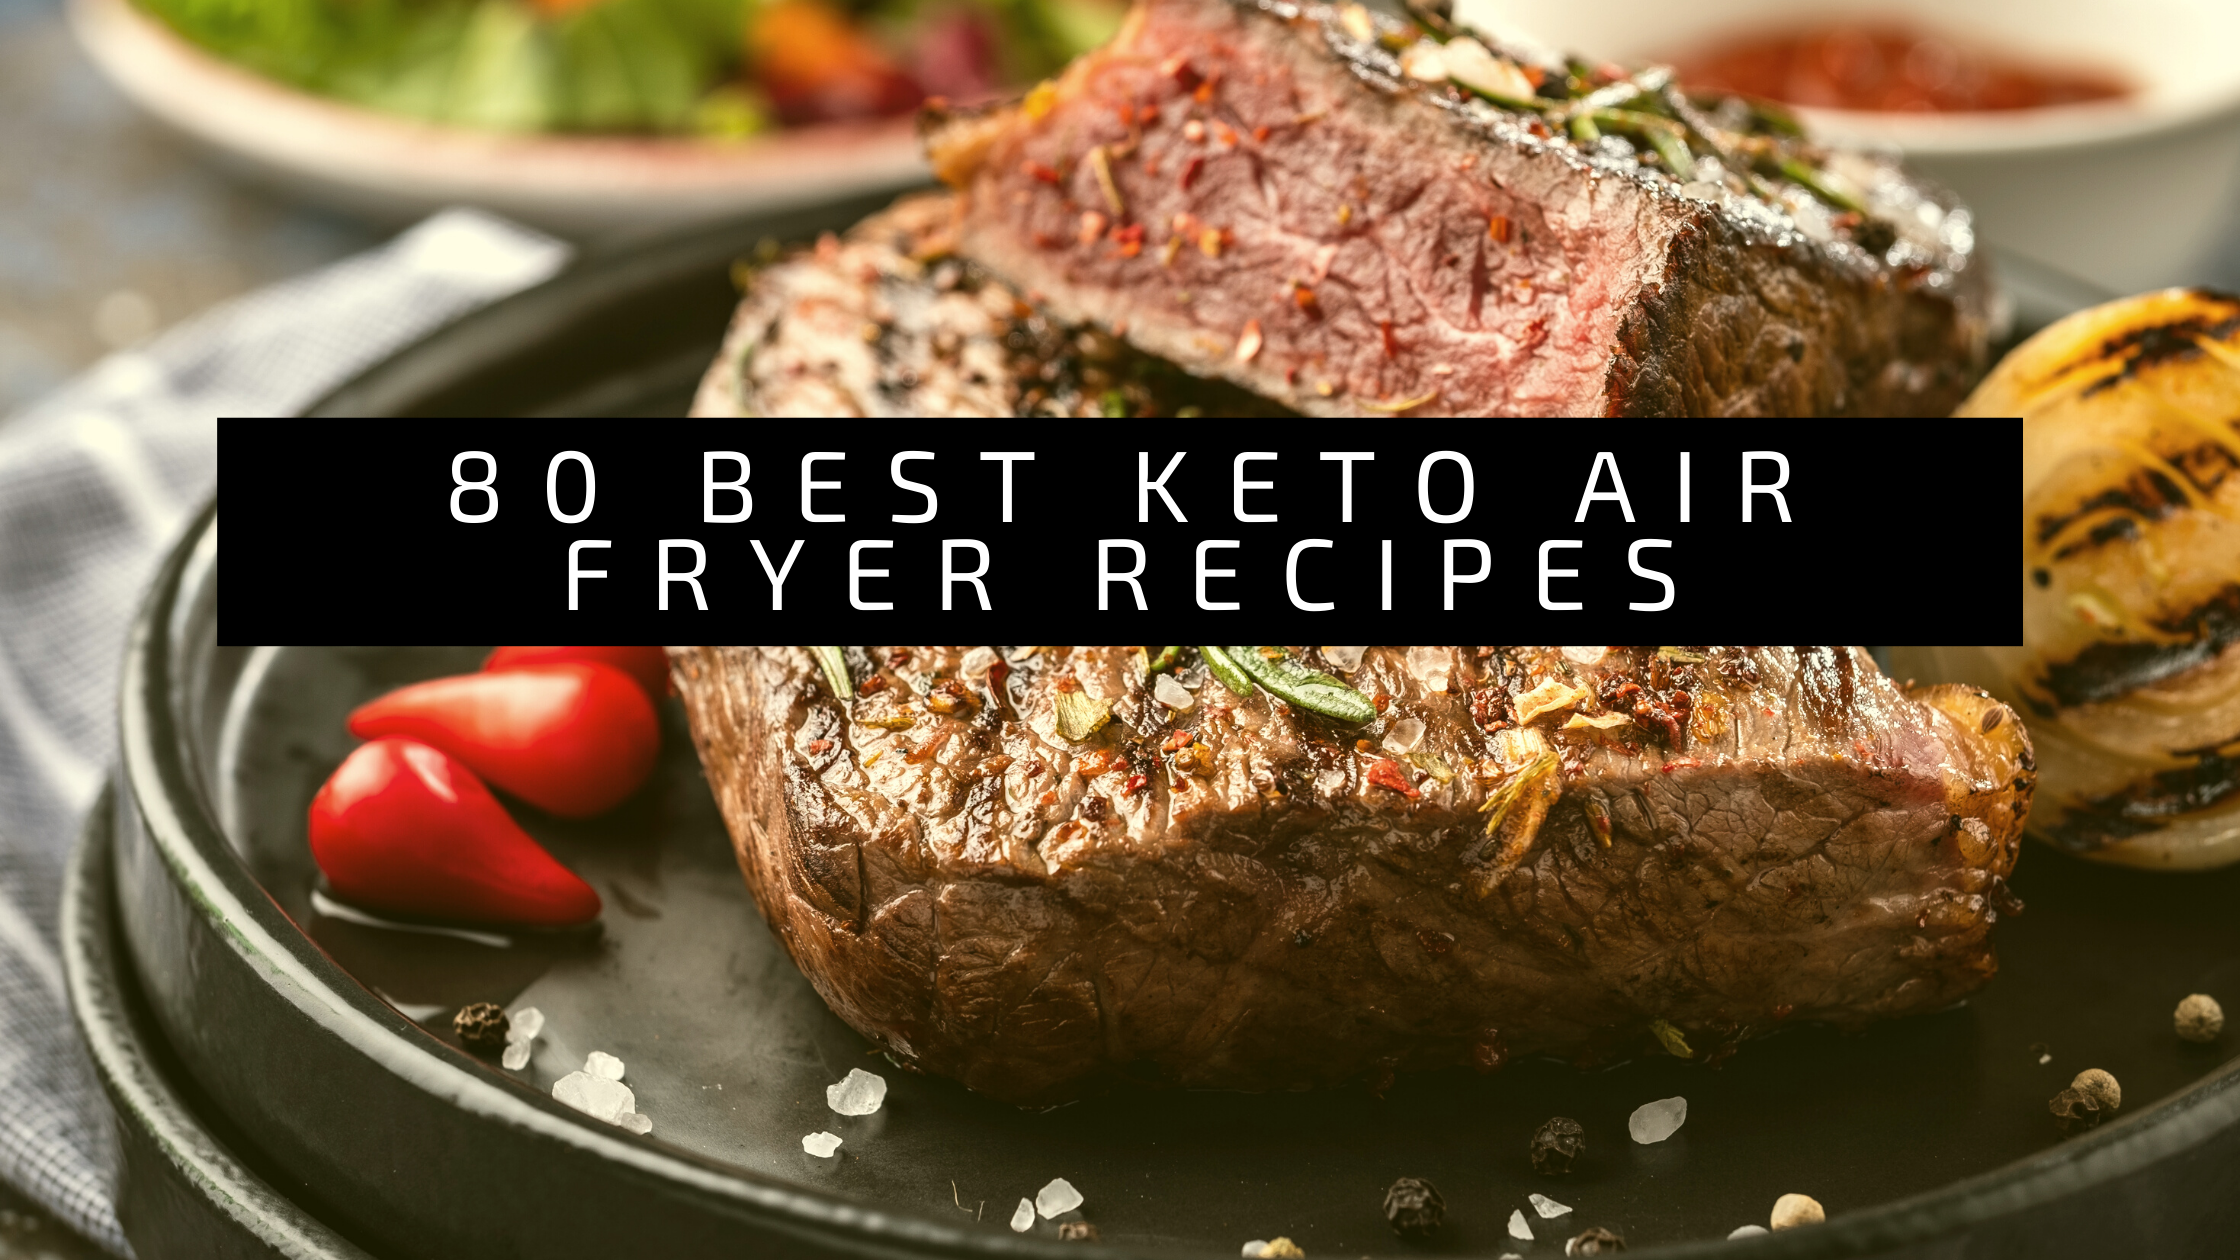 40 Family-Friendly Keto Air Fryer Recipes for Quick and Delicious Meals 17